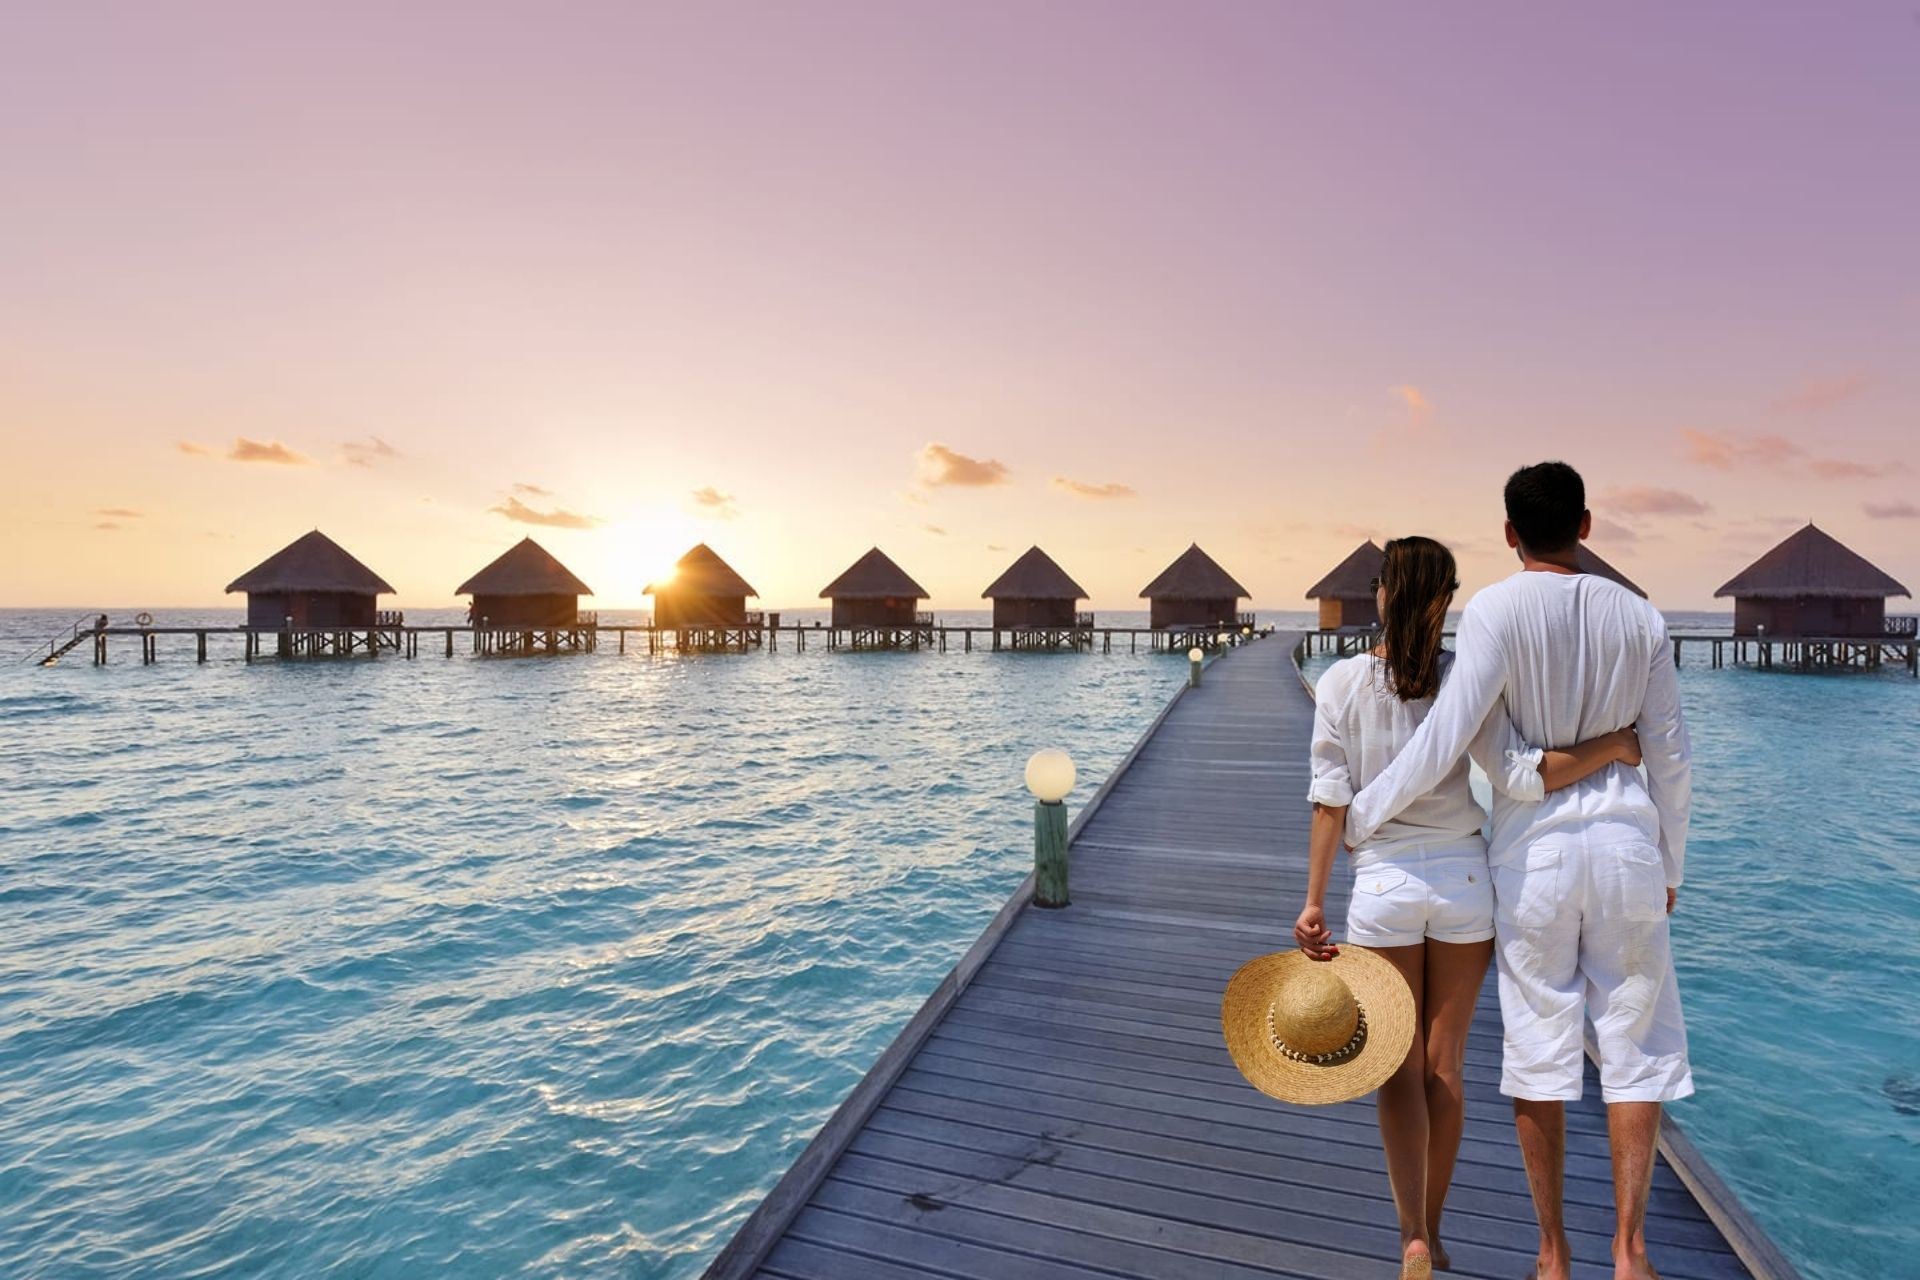 tour packages of maldives from delhi